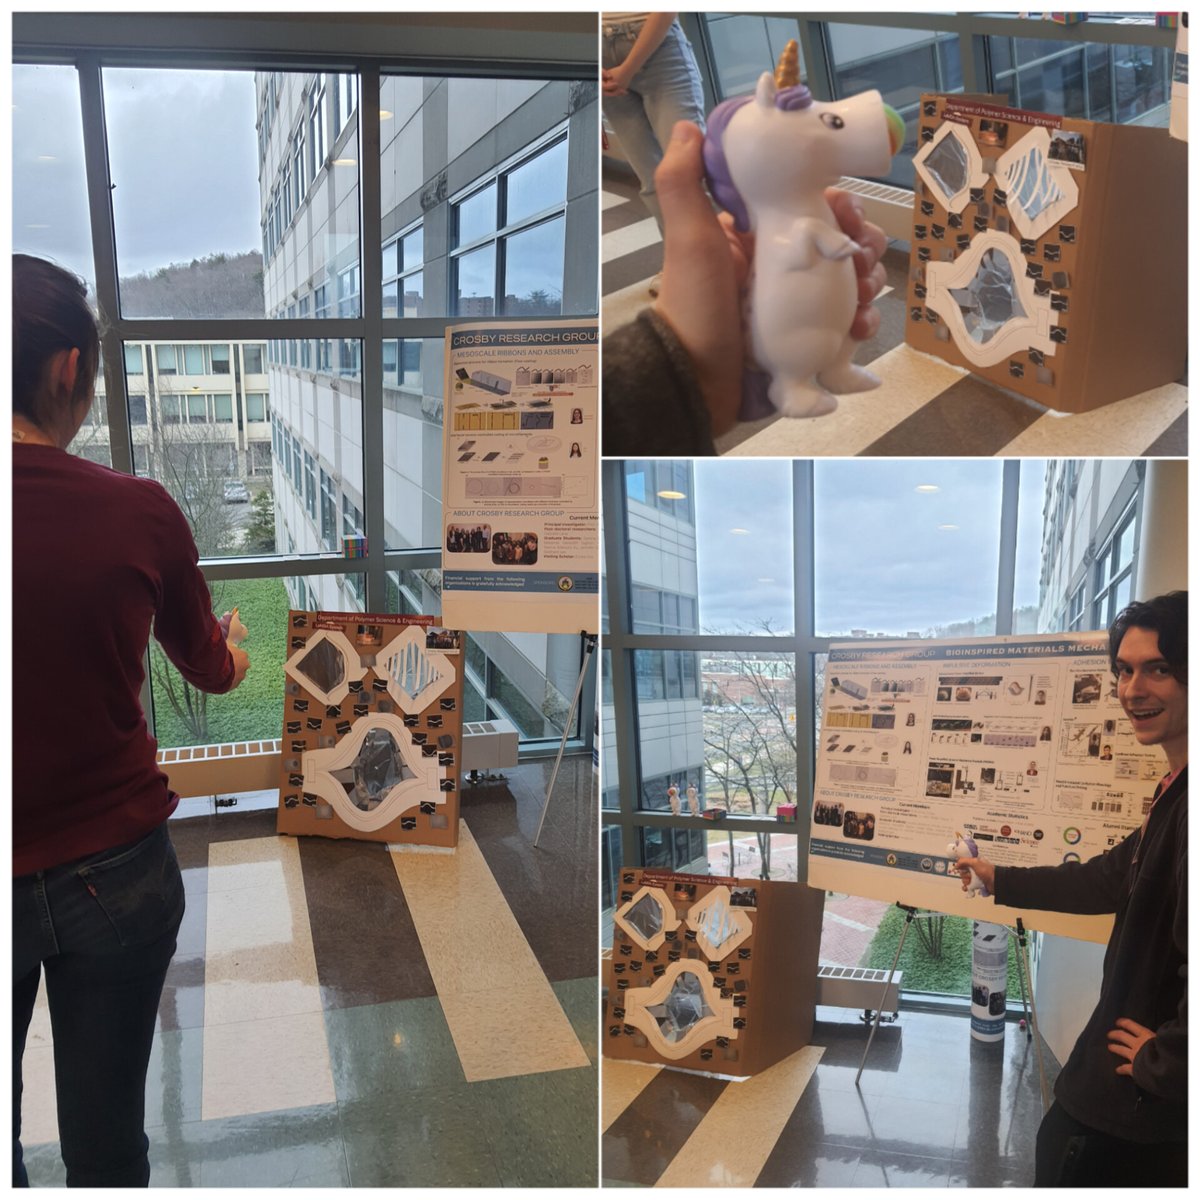 🦄 Our recruiting day featured a creative unicorn popper game, drawing parallels to LAMSA systems (LAtch-Mediated Spring Actuation). These systems are found in nature and inspire our research in high-speed events and power storage in polymers! 🦗🦐 #RecruitingDay #ScienceFunFacts